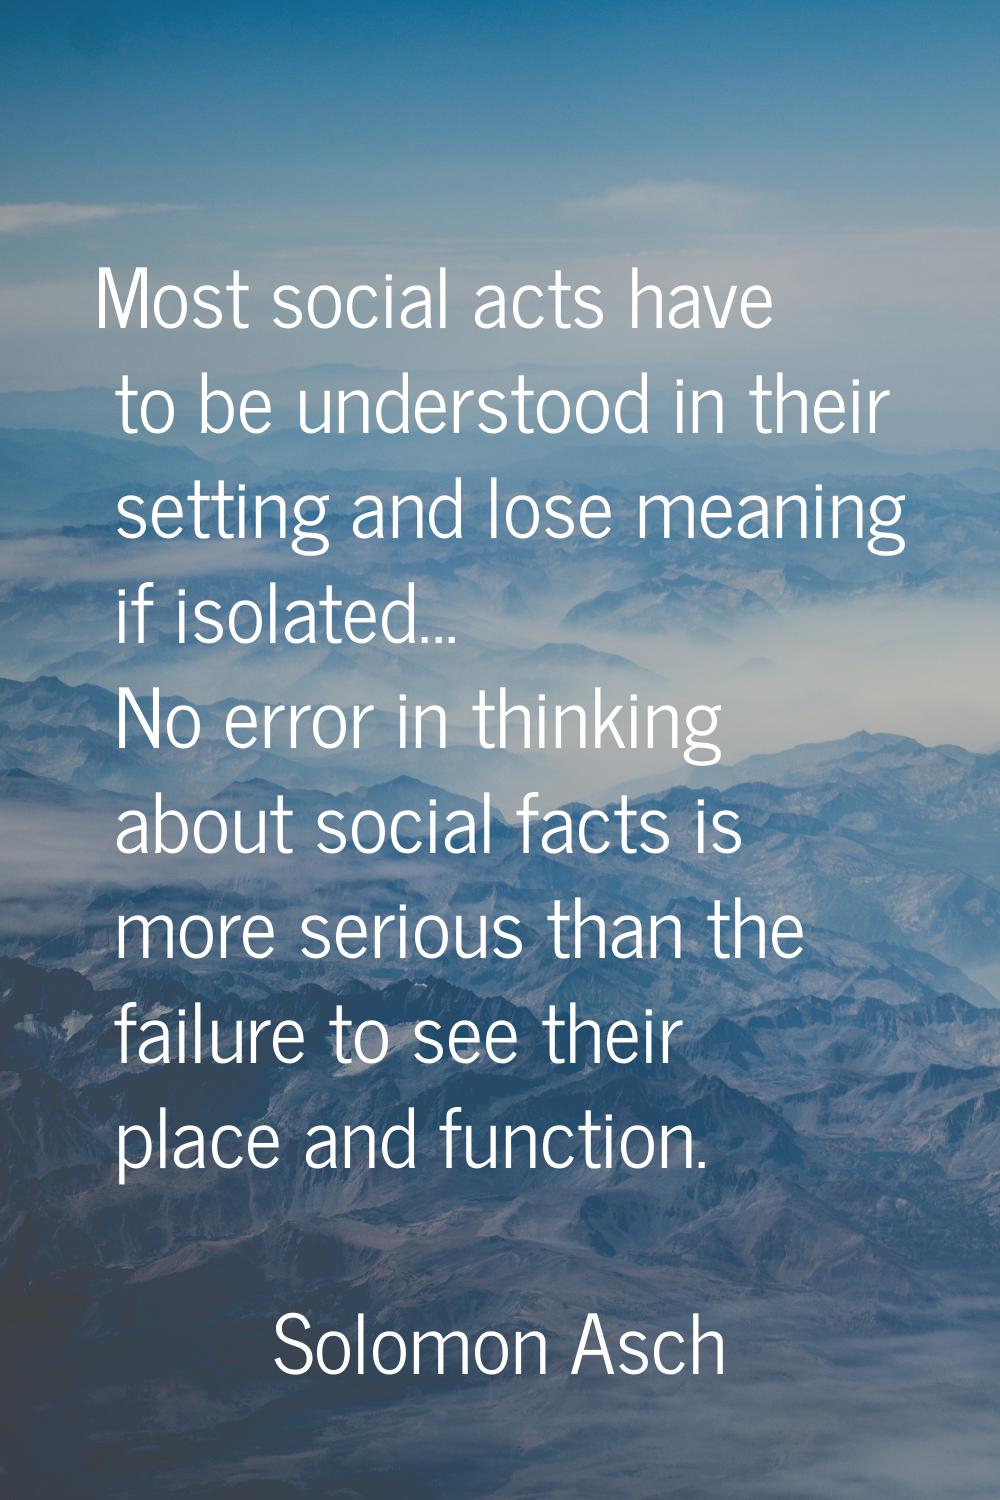 Most social acts have to be understood in their setting and lose meaning if isolated... No error in